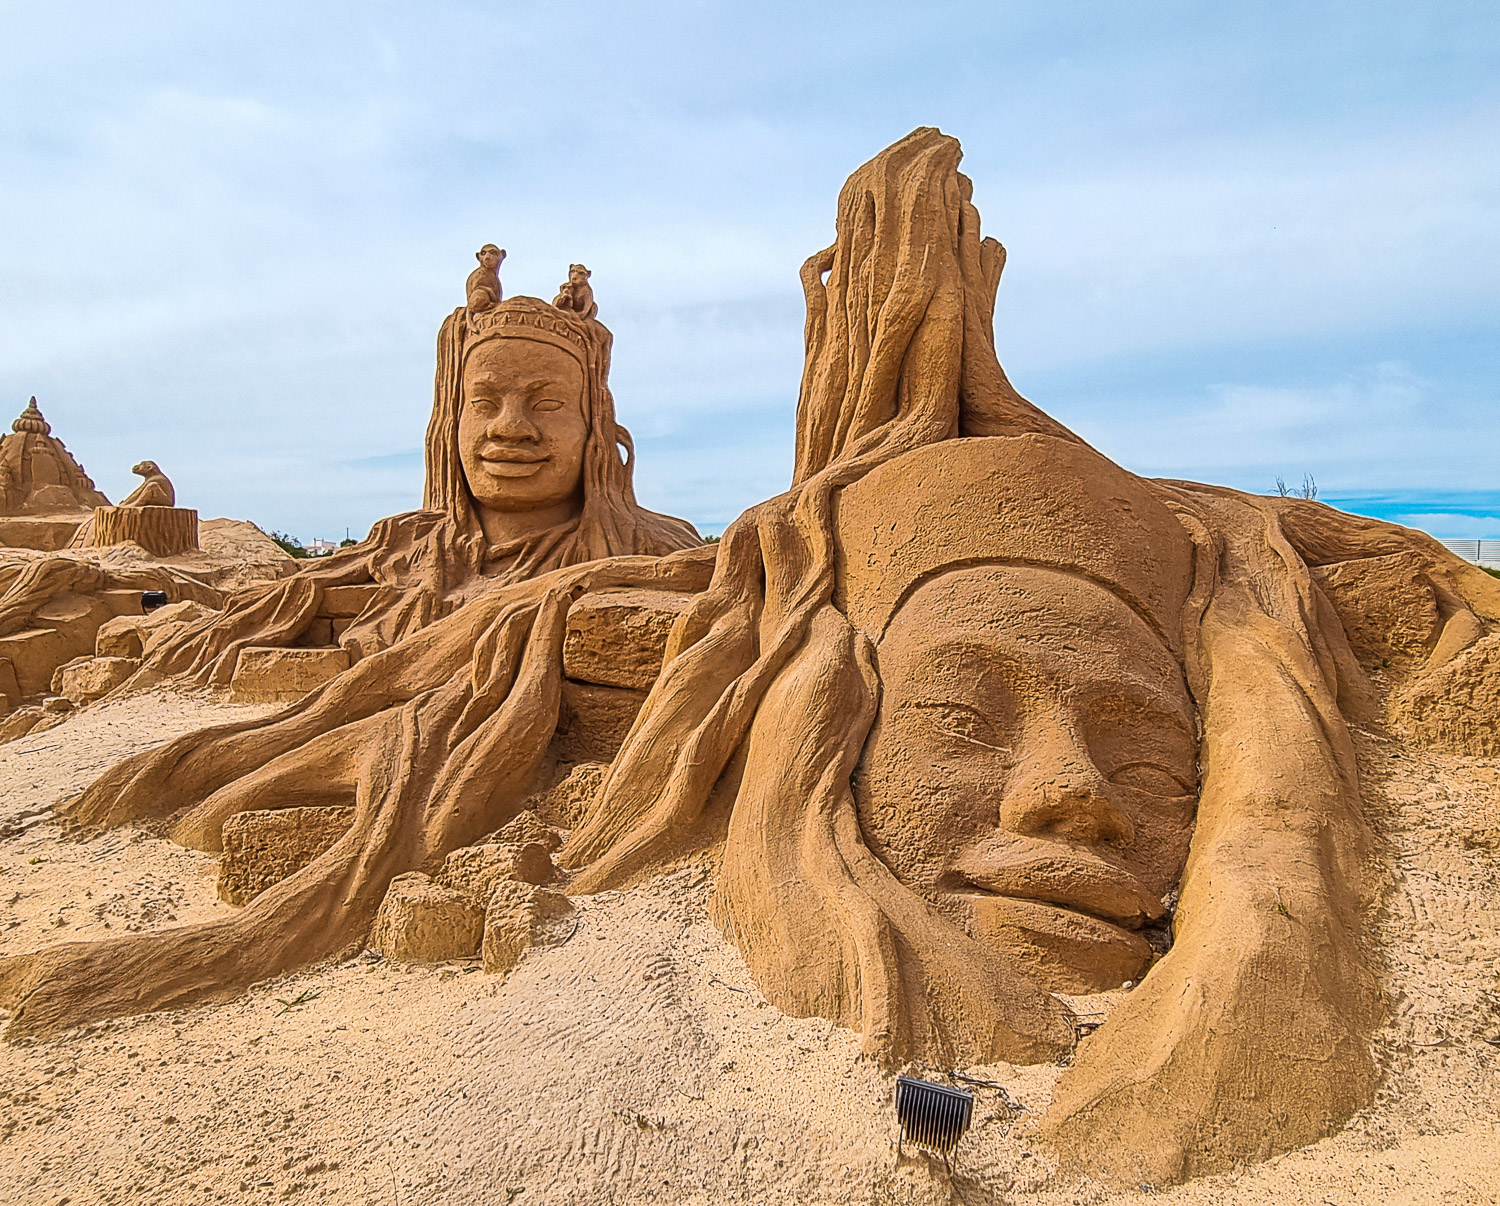 Recreation of Cambodian temple including huge heads wrapped in trees and monkeys at Sand City Lagoa - one of my top things to do in the Algarve with kids